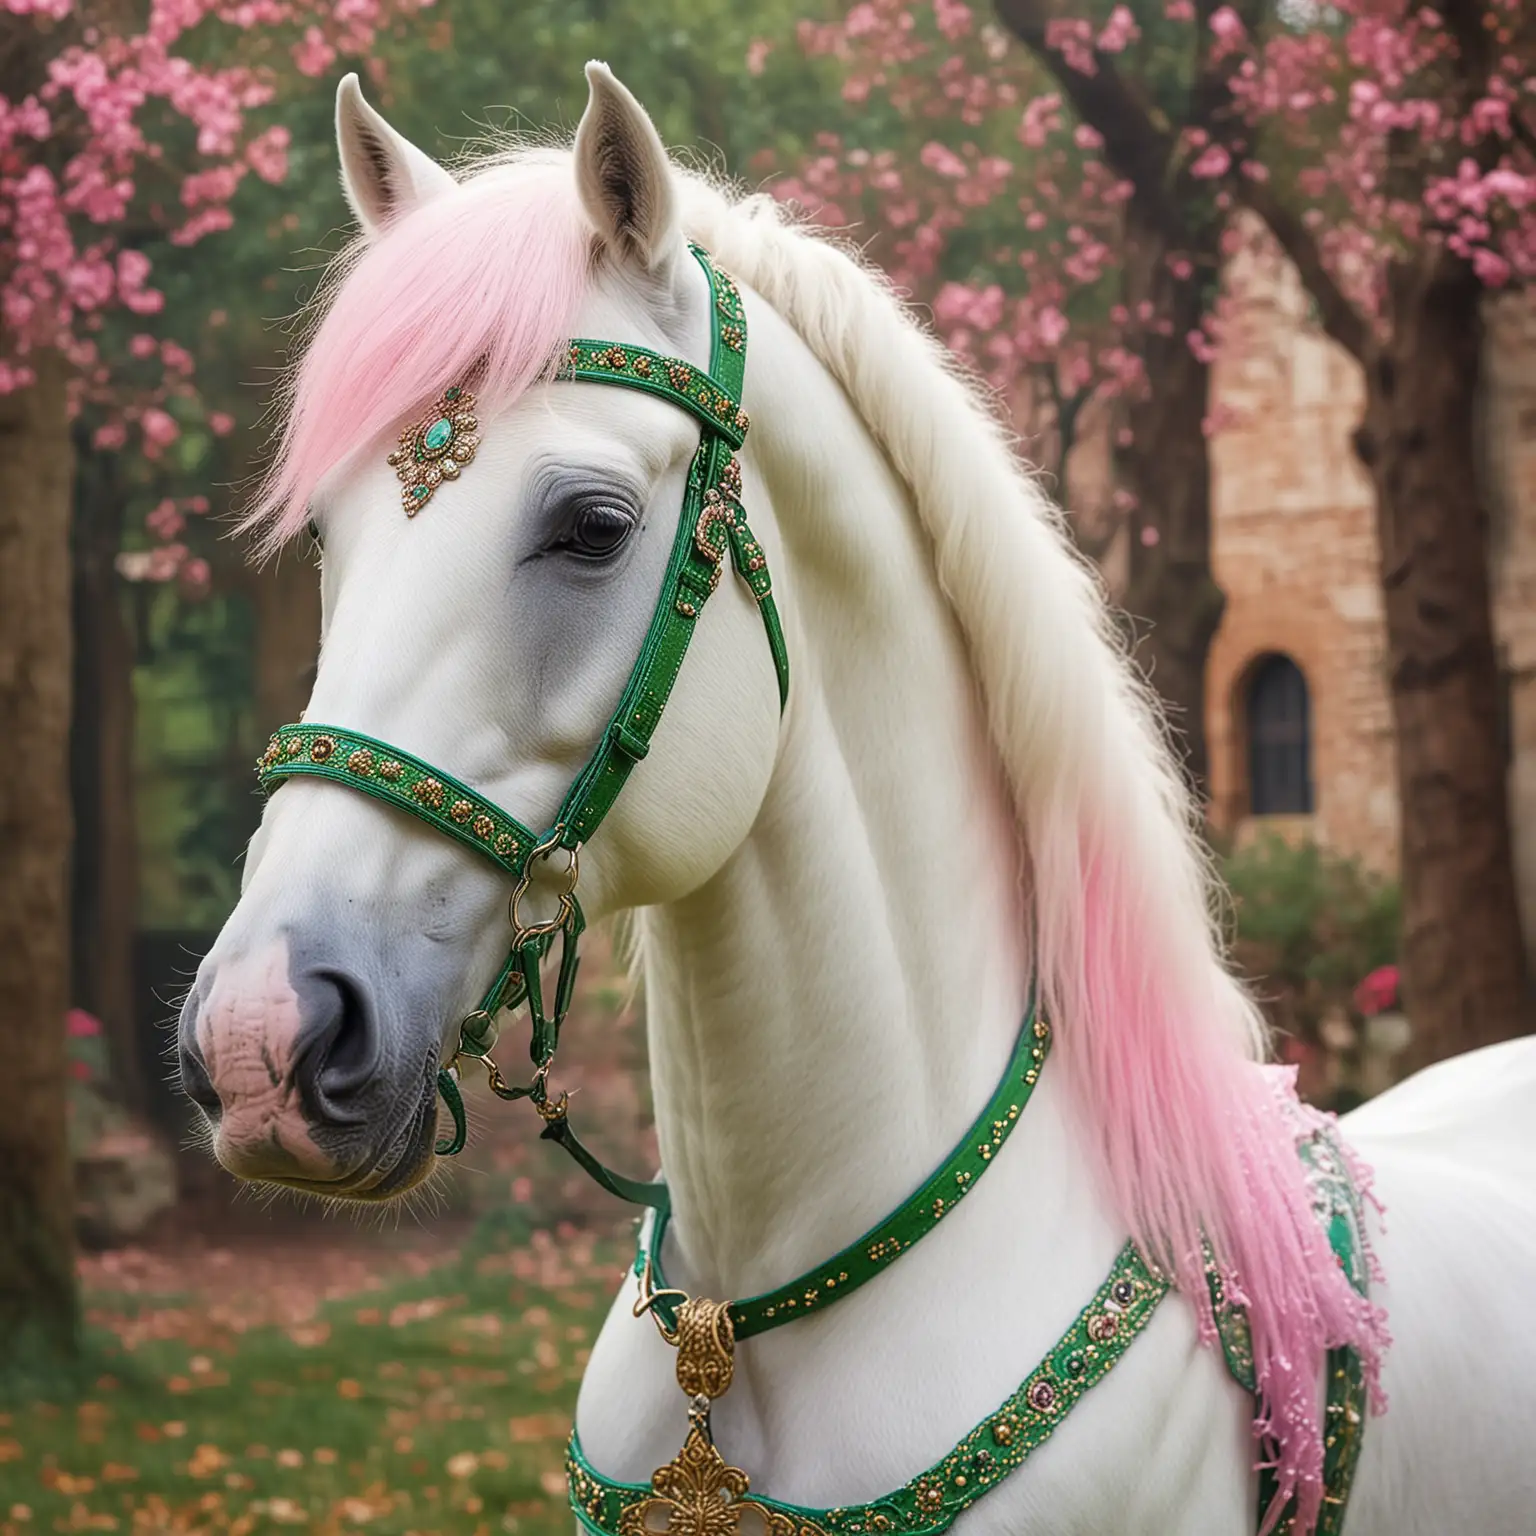 A white fairytale horse with a slightly longer forehead, looking very smart, showing off it’s new costume in green and pink , drama queen, adorable, in a fantasy setting, vivid colors